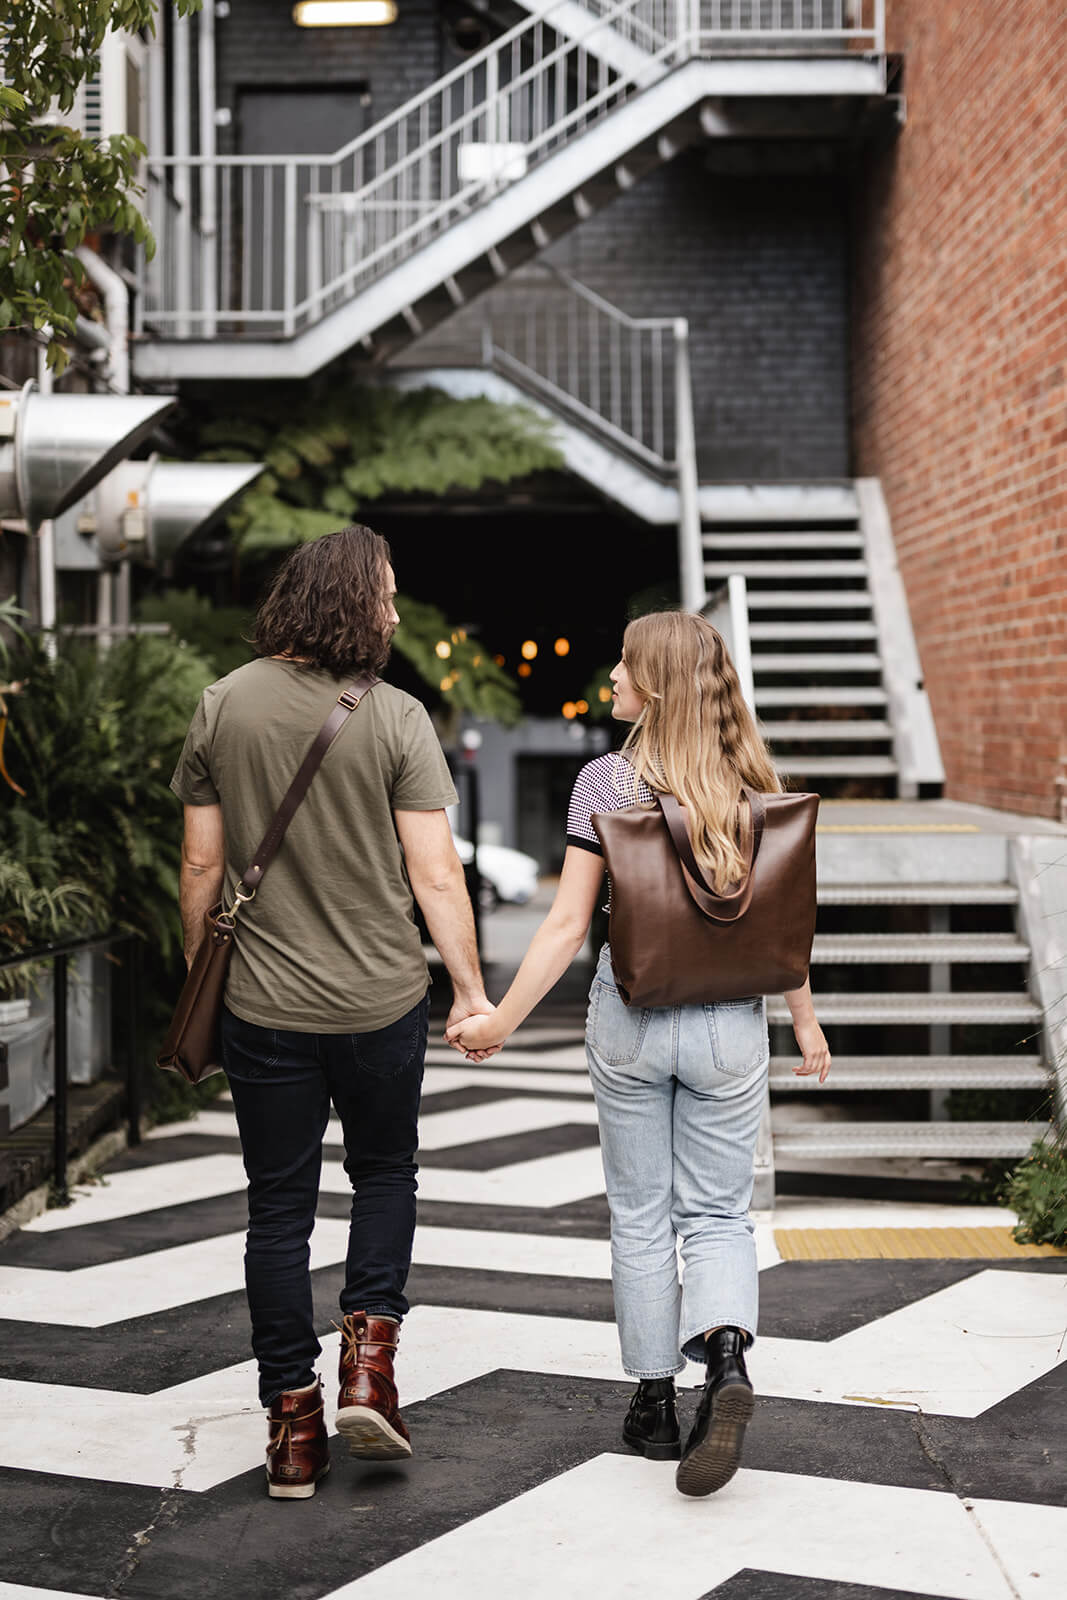 A man and woman walking hand in hand (interesting staircase behind). They are modelling Ella Jackson leather bags. The man on the left is wearing a brown leather crossbody bag and the woman on the right is wearing a brown leather backpack.